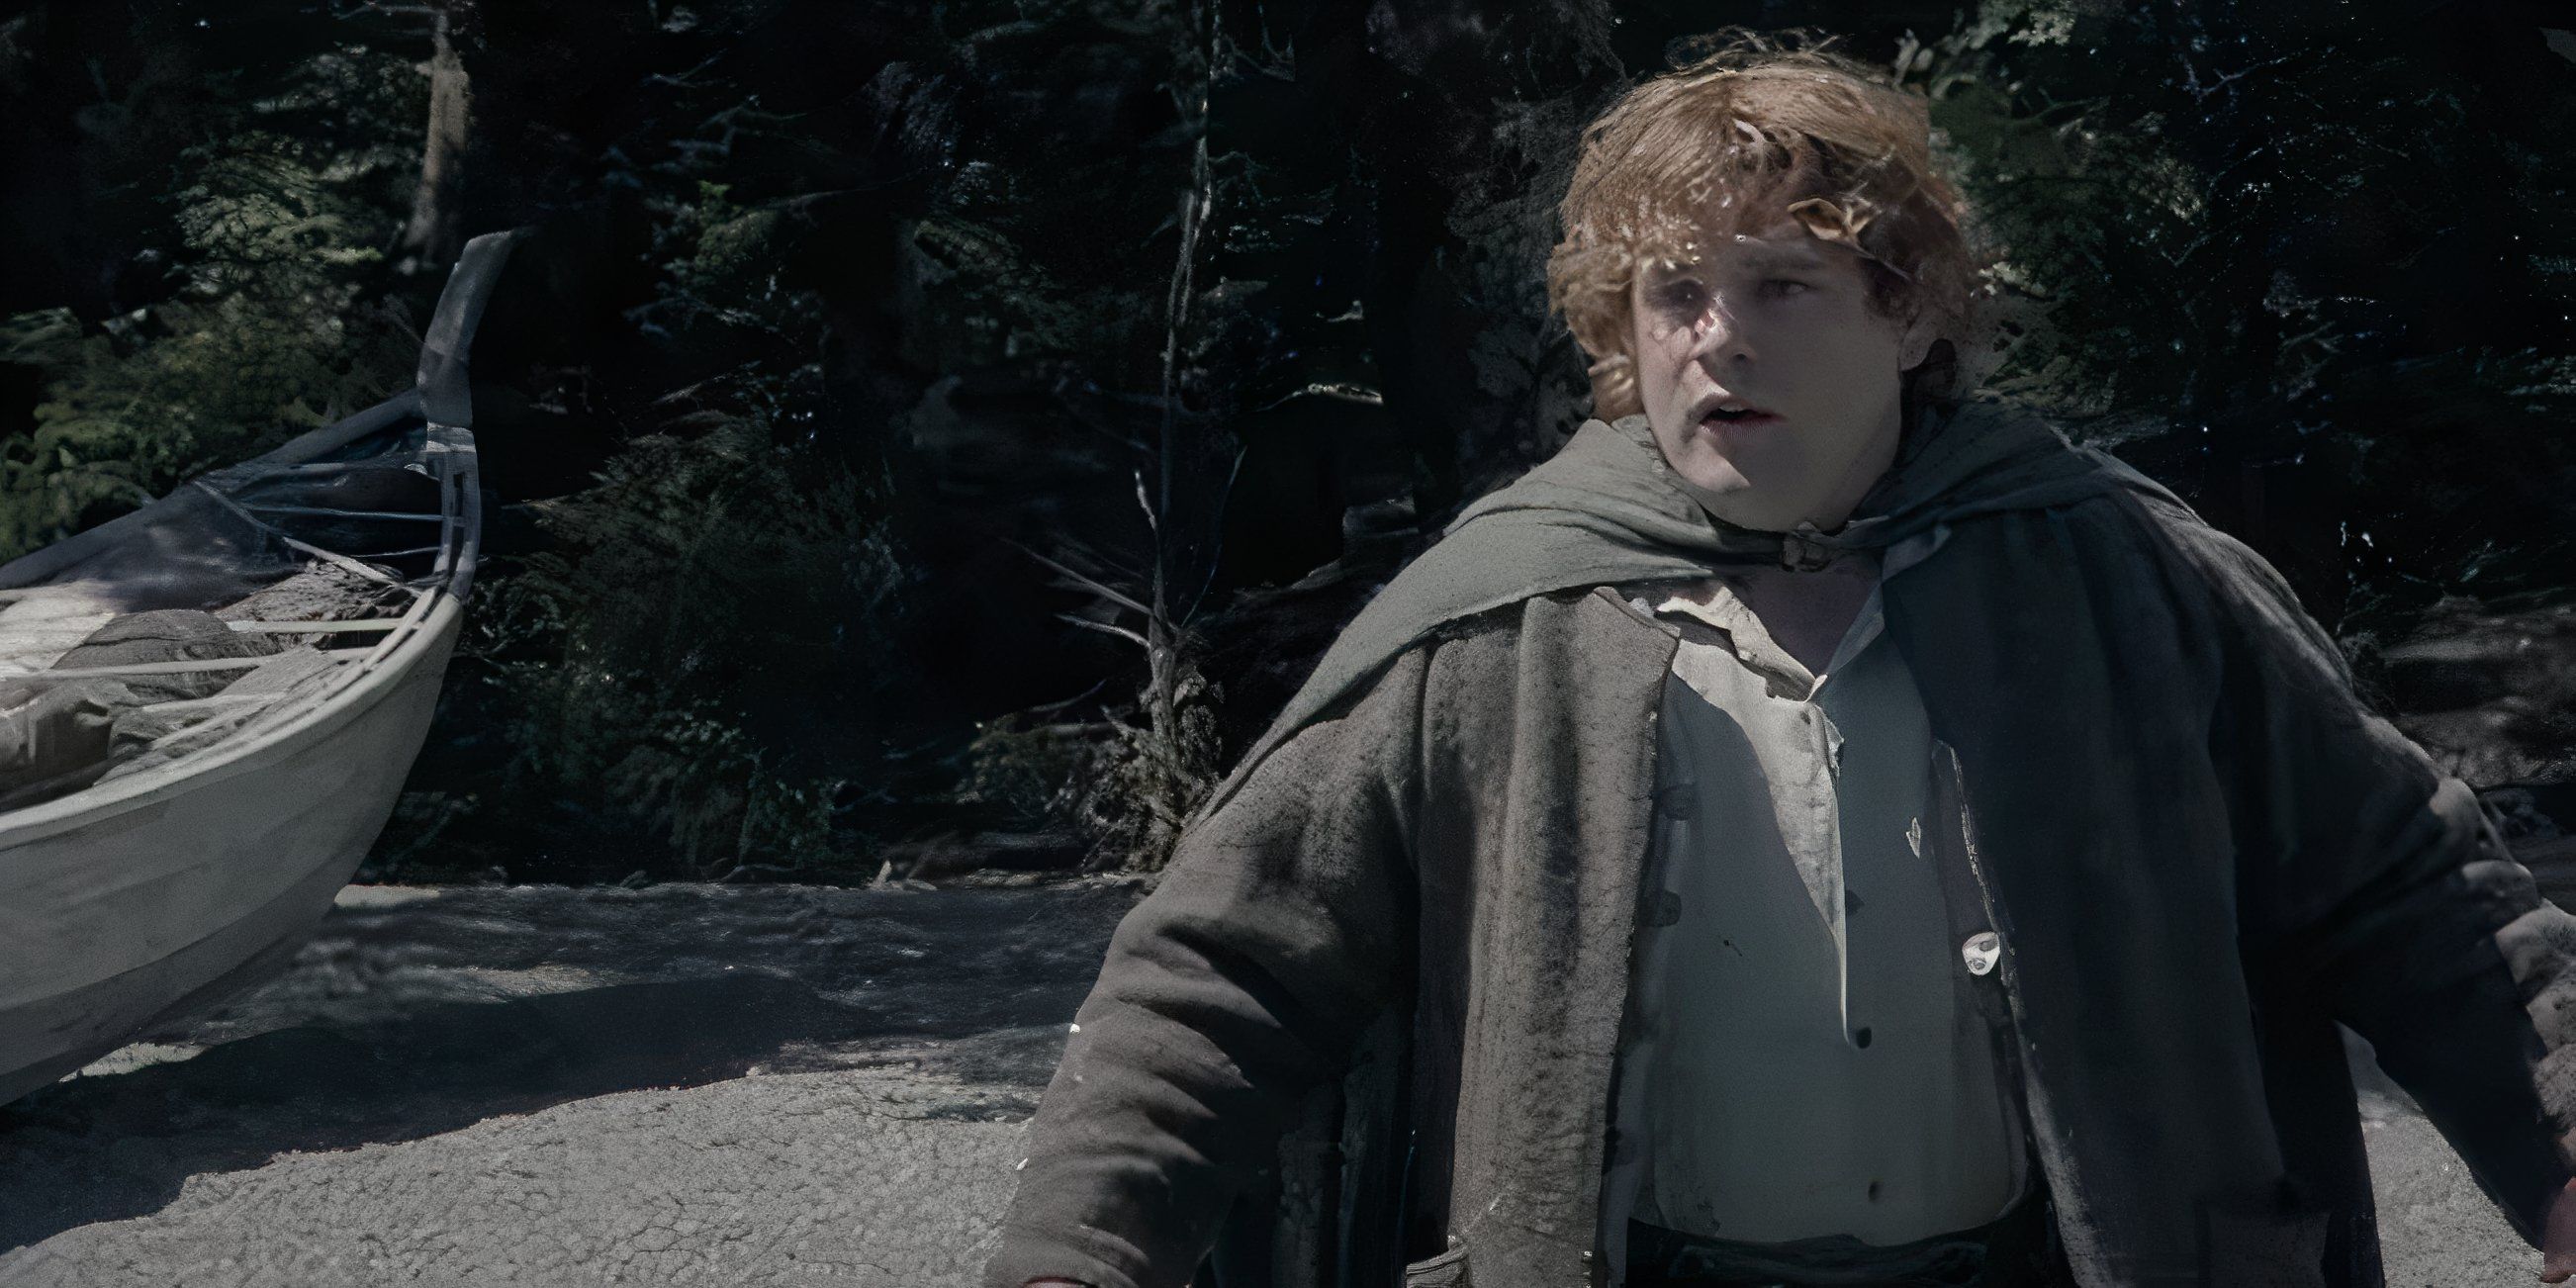 Sam stands on the riverbank in The Lord of the Rings: The Fellowship of the Ring